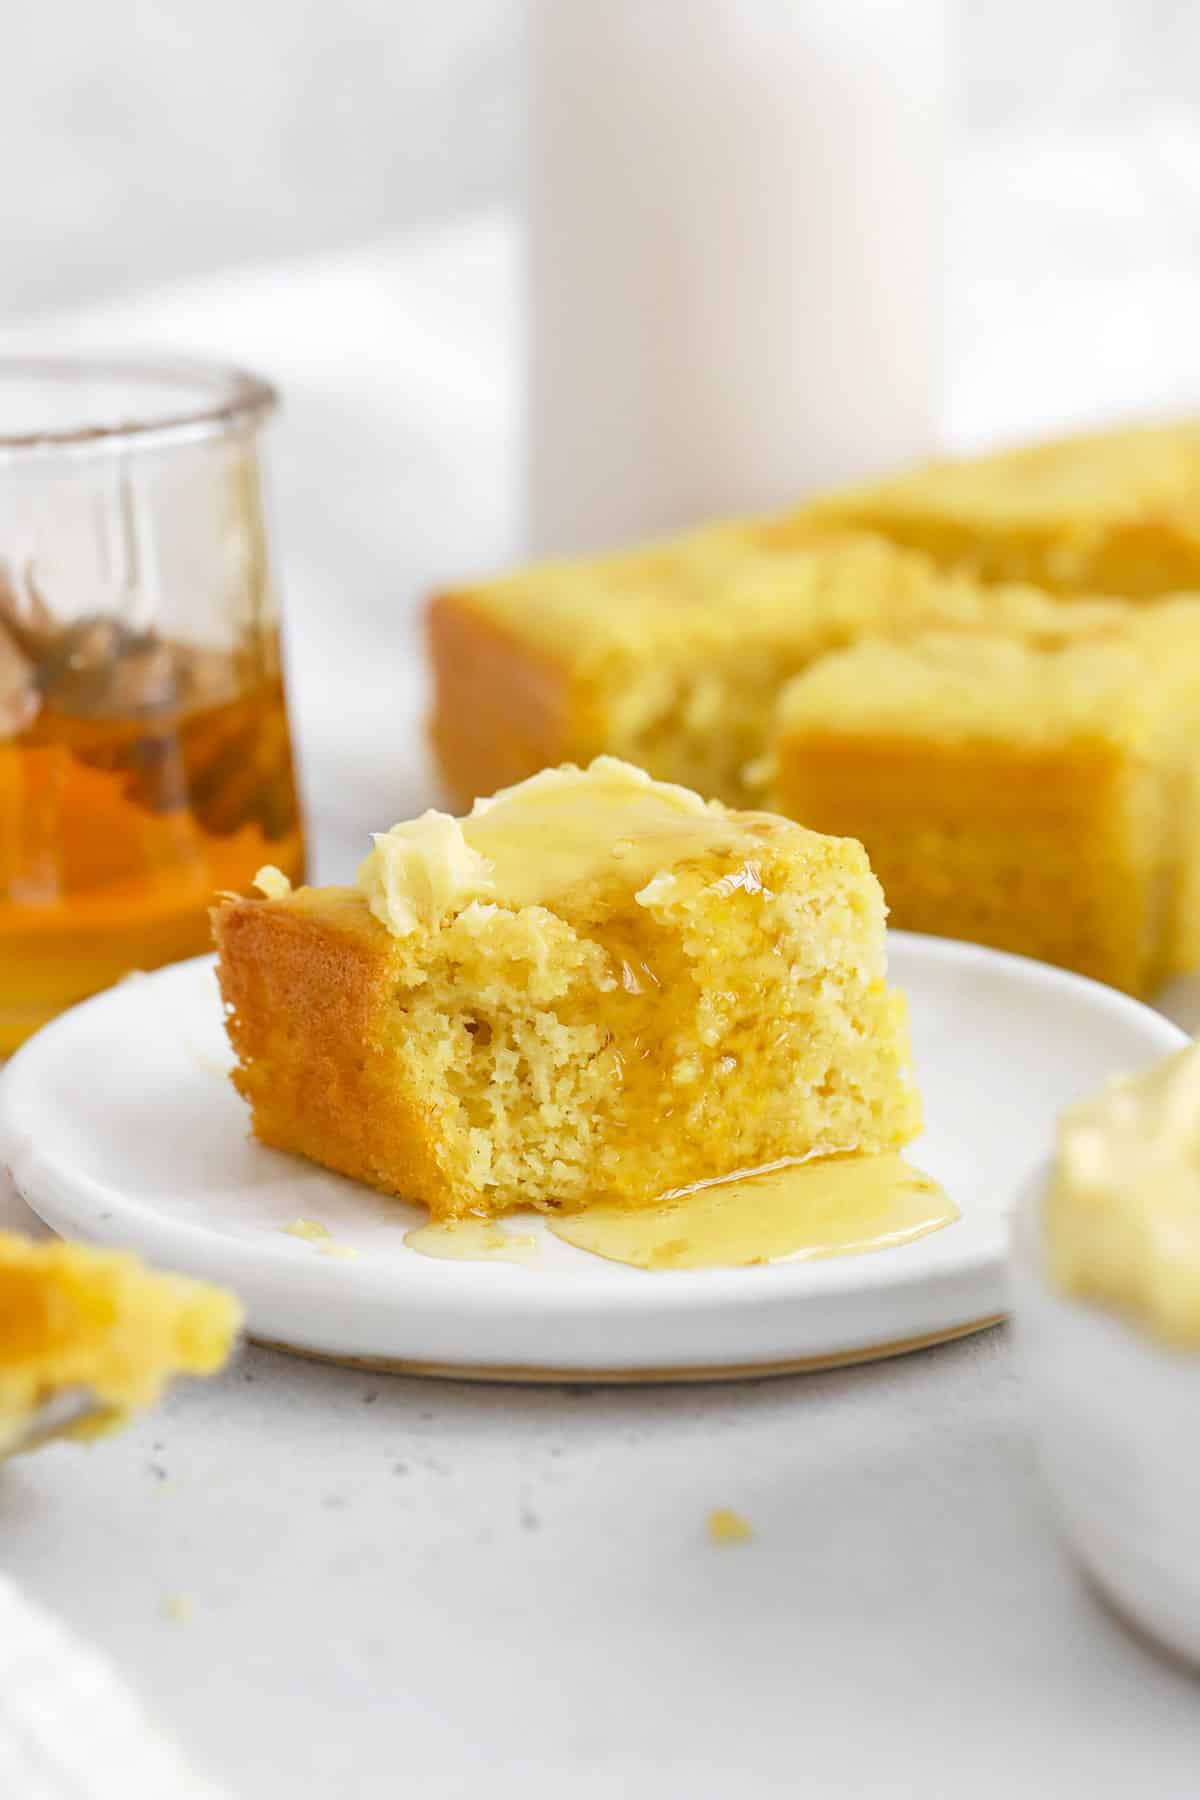 Gluten-free cornbread being drizzled with honey